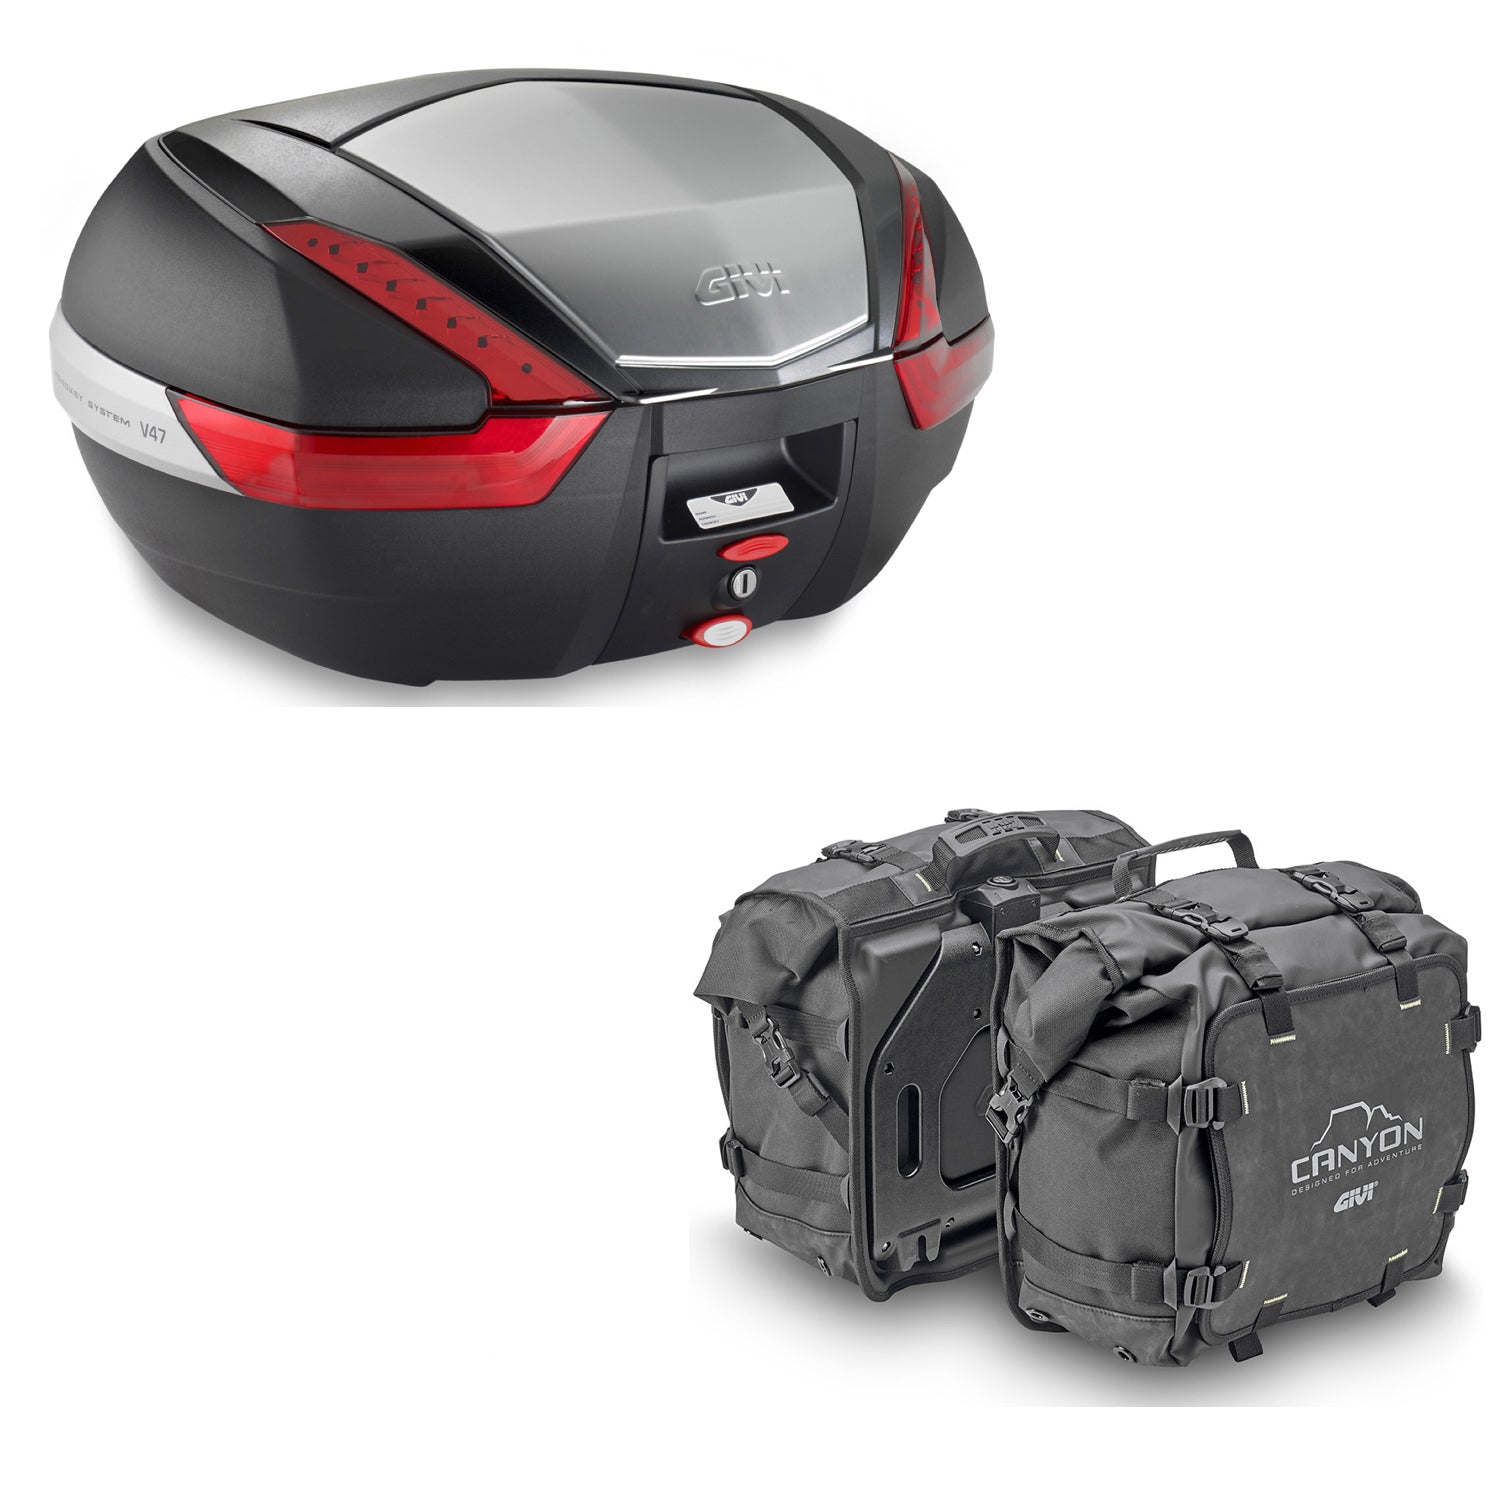 GIVI BAULETTO V47N + VALIGIE LATERALI CANYON GRT720 COMPATIBILE CON YAMAHA TRACER 900 GT 18/20